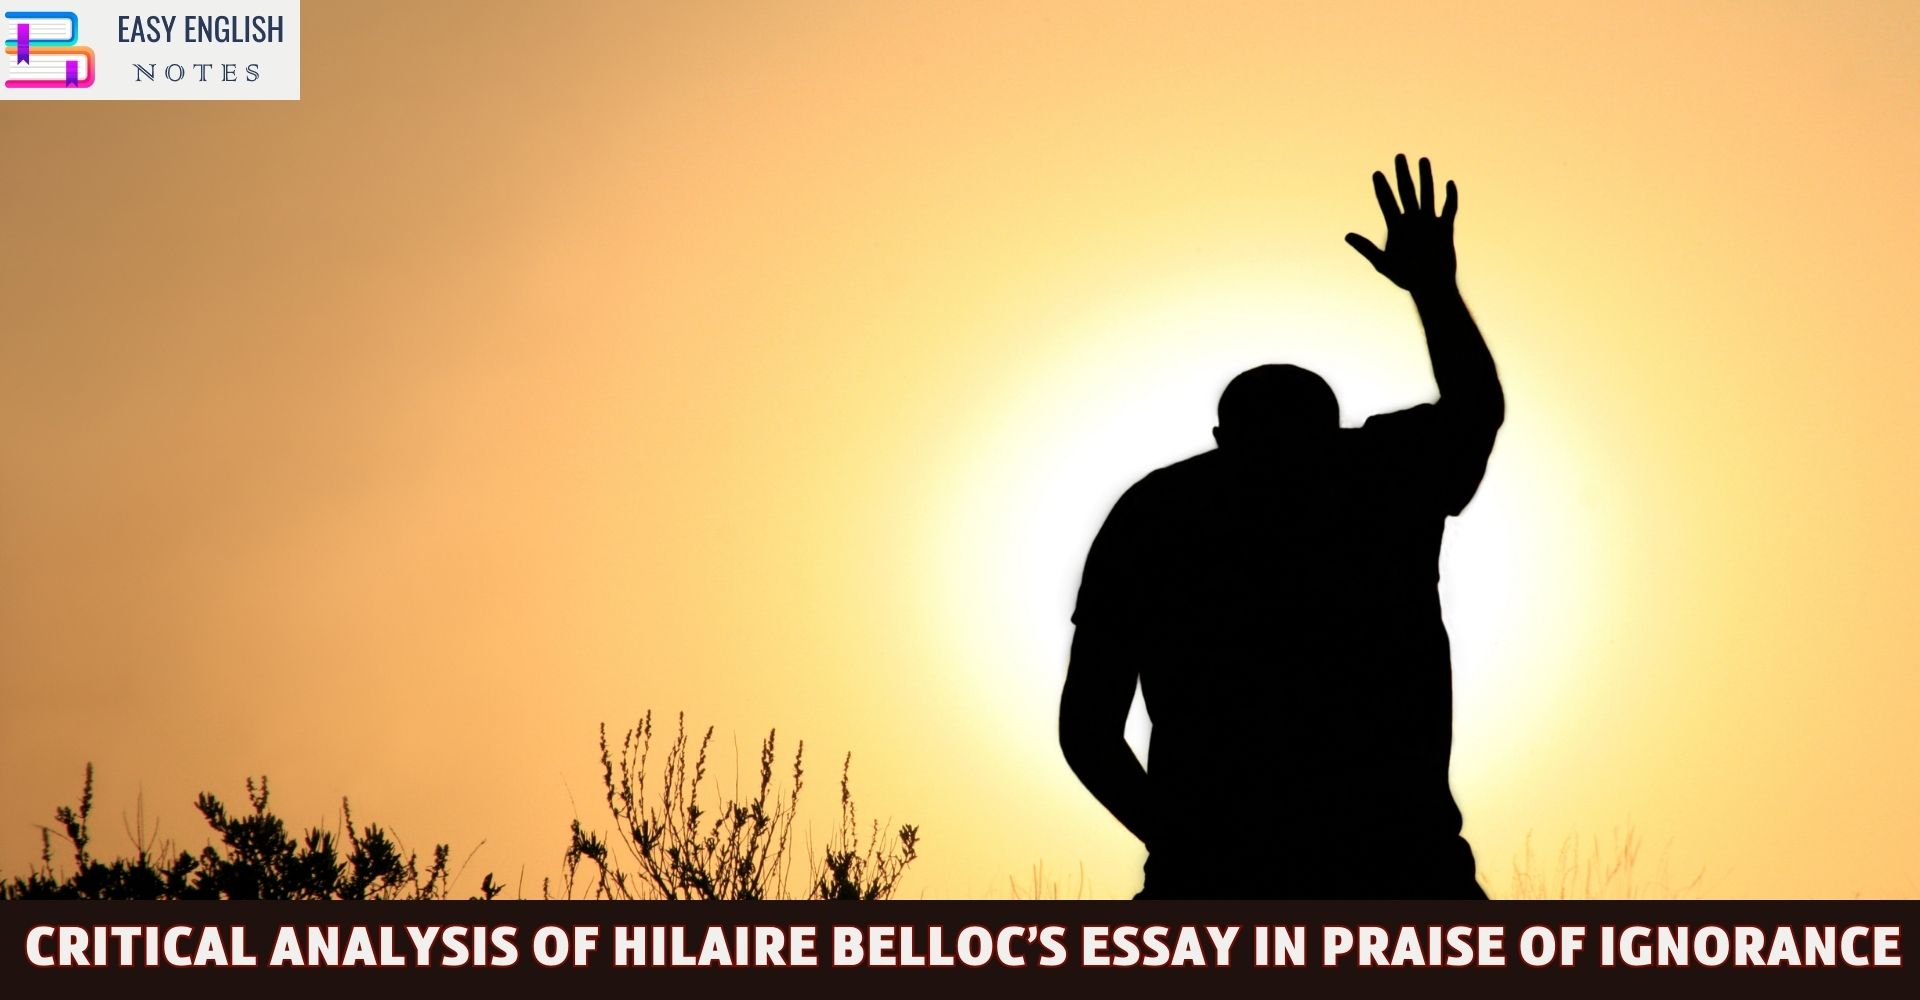 Critical Analysis of Hilaire Belloc’s Essay In Praise of Ignorance